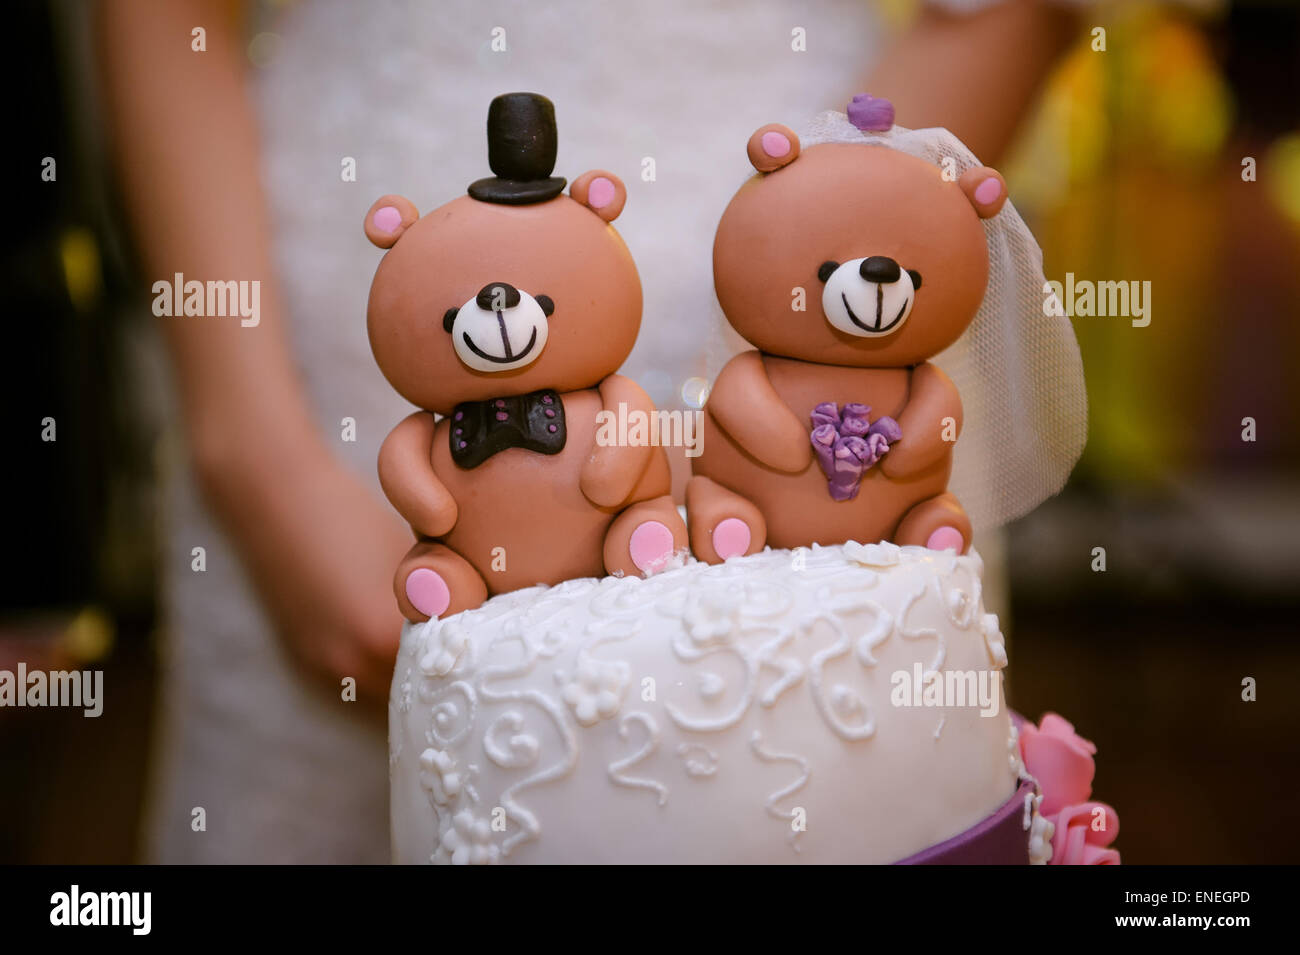 beautiful wedding cake with a teddy bear at the top Stock Photo